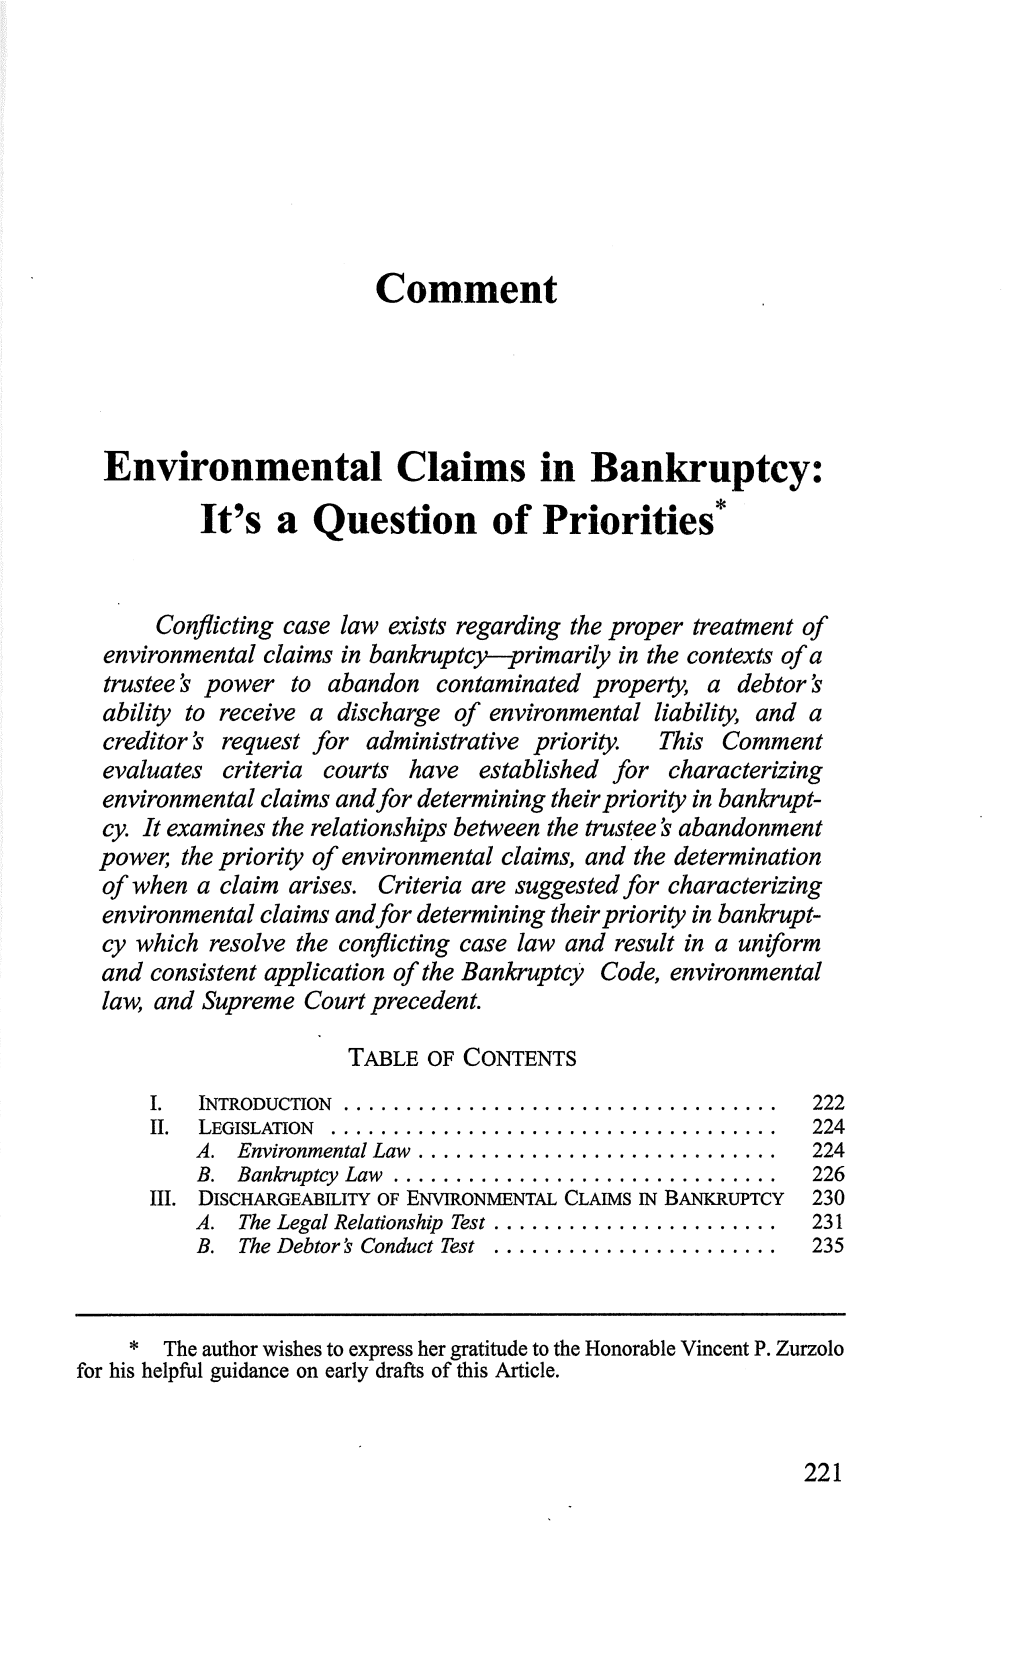 Environmental Claims in Bankruptcy: It's a Question of Priorities*